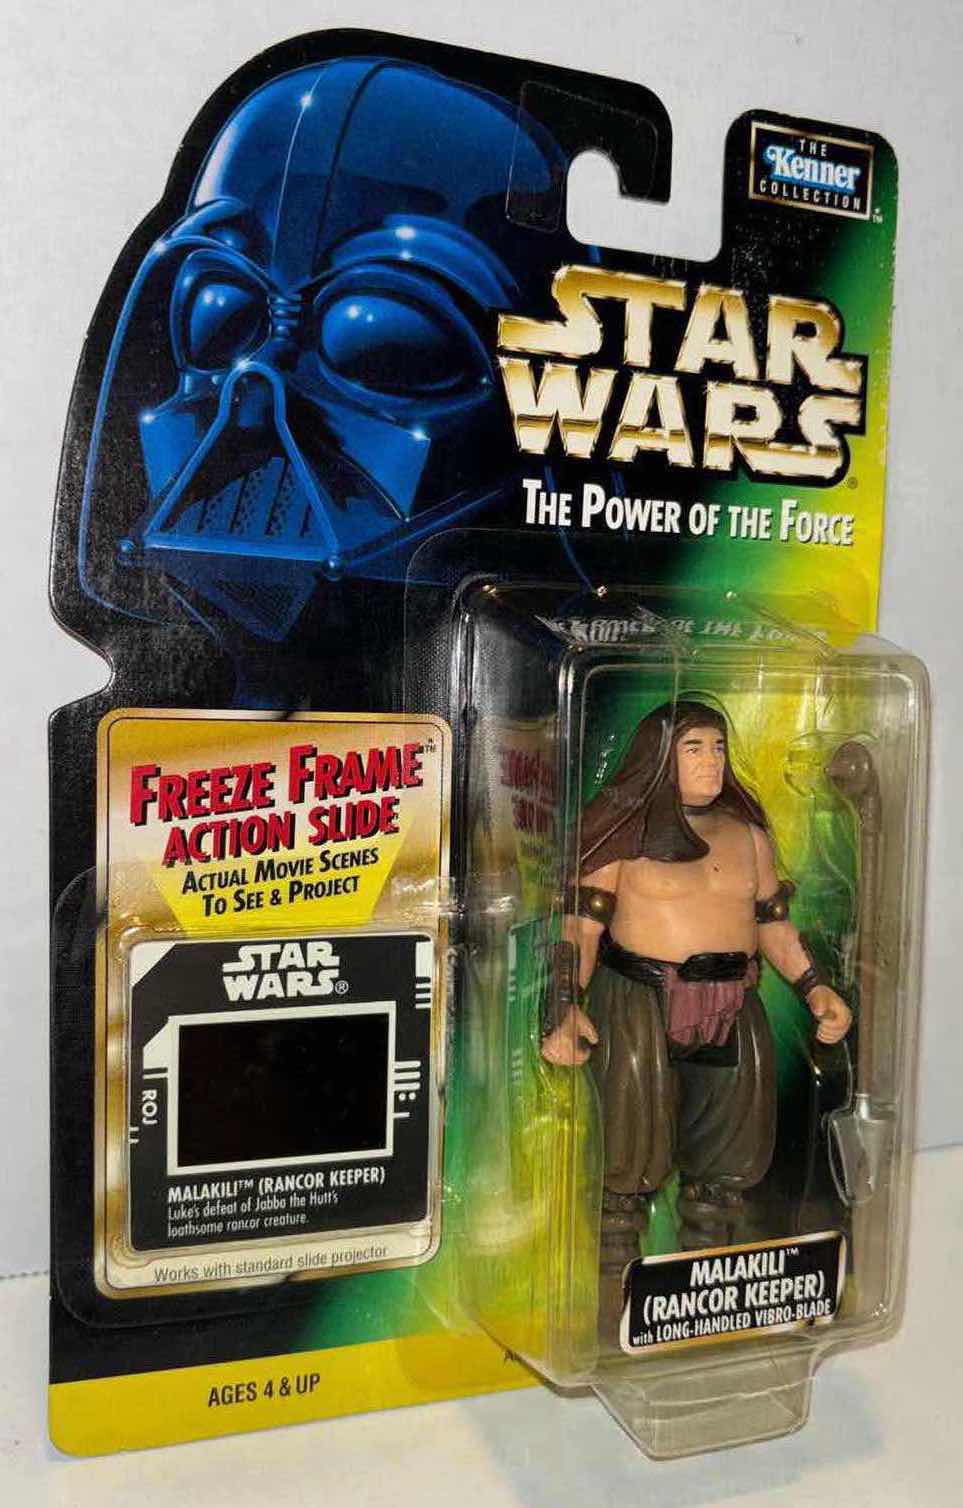 Photo 1 of NEW KENNER STAR WARS THE POWER OF THE FORCE ACTION FIGURE, MALAKILI (RANCOR KEEPER) W LONG-HANDLED VIBRO-BLADE (1)